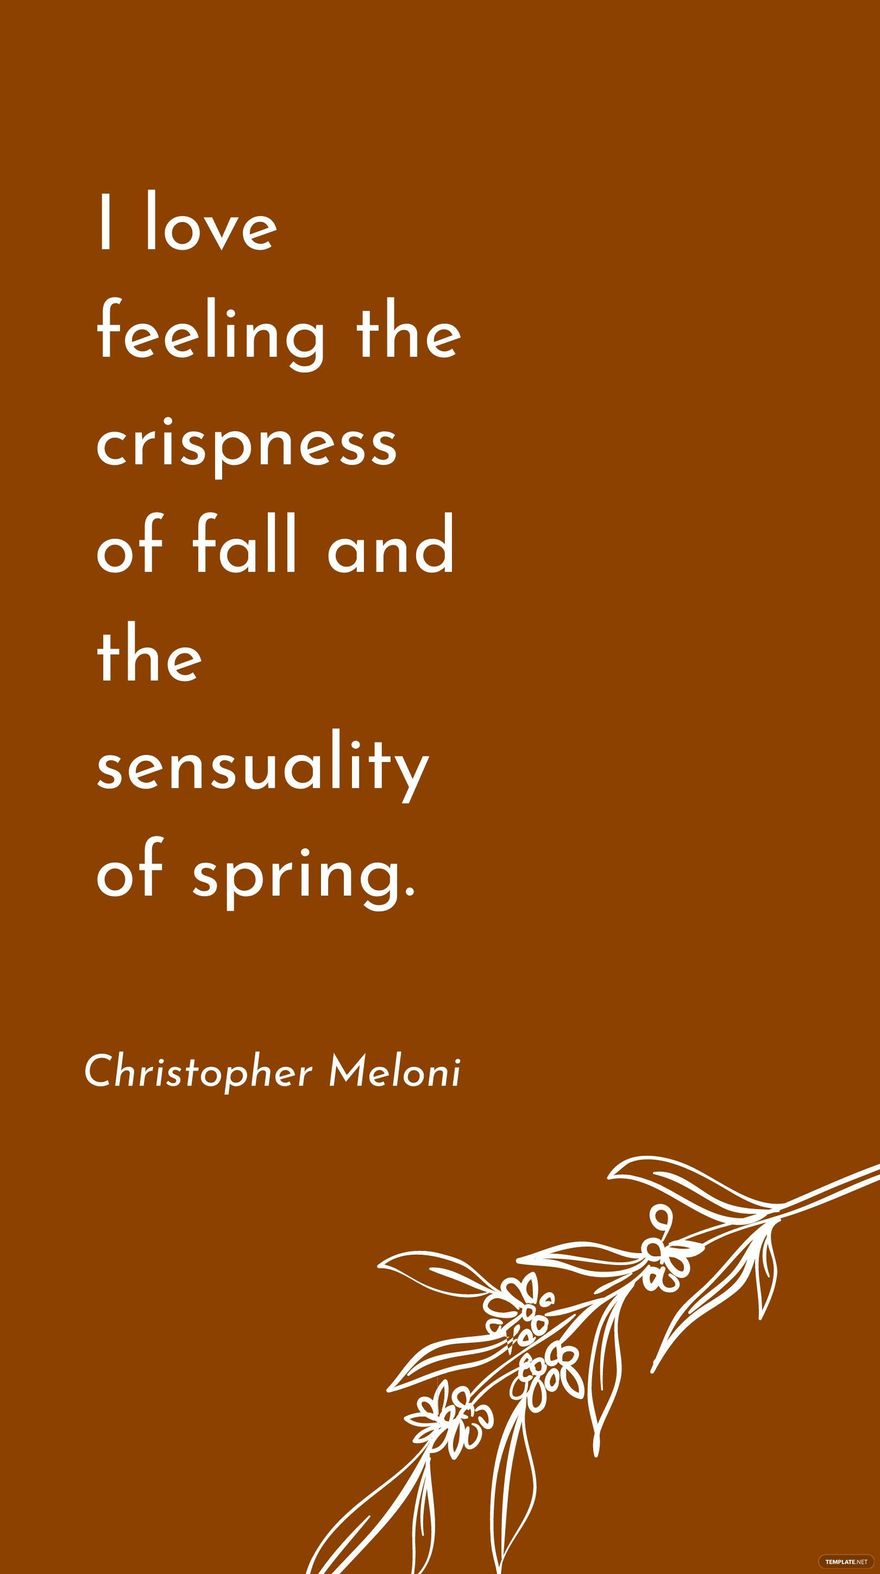 Christopher Meloni - I love feeling the crispness of fall and the sensuality of spring.